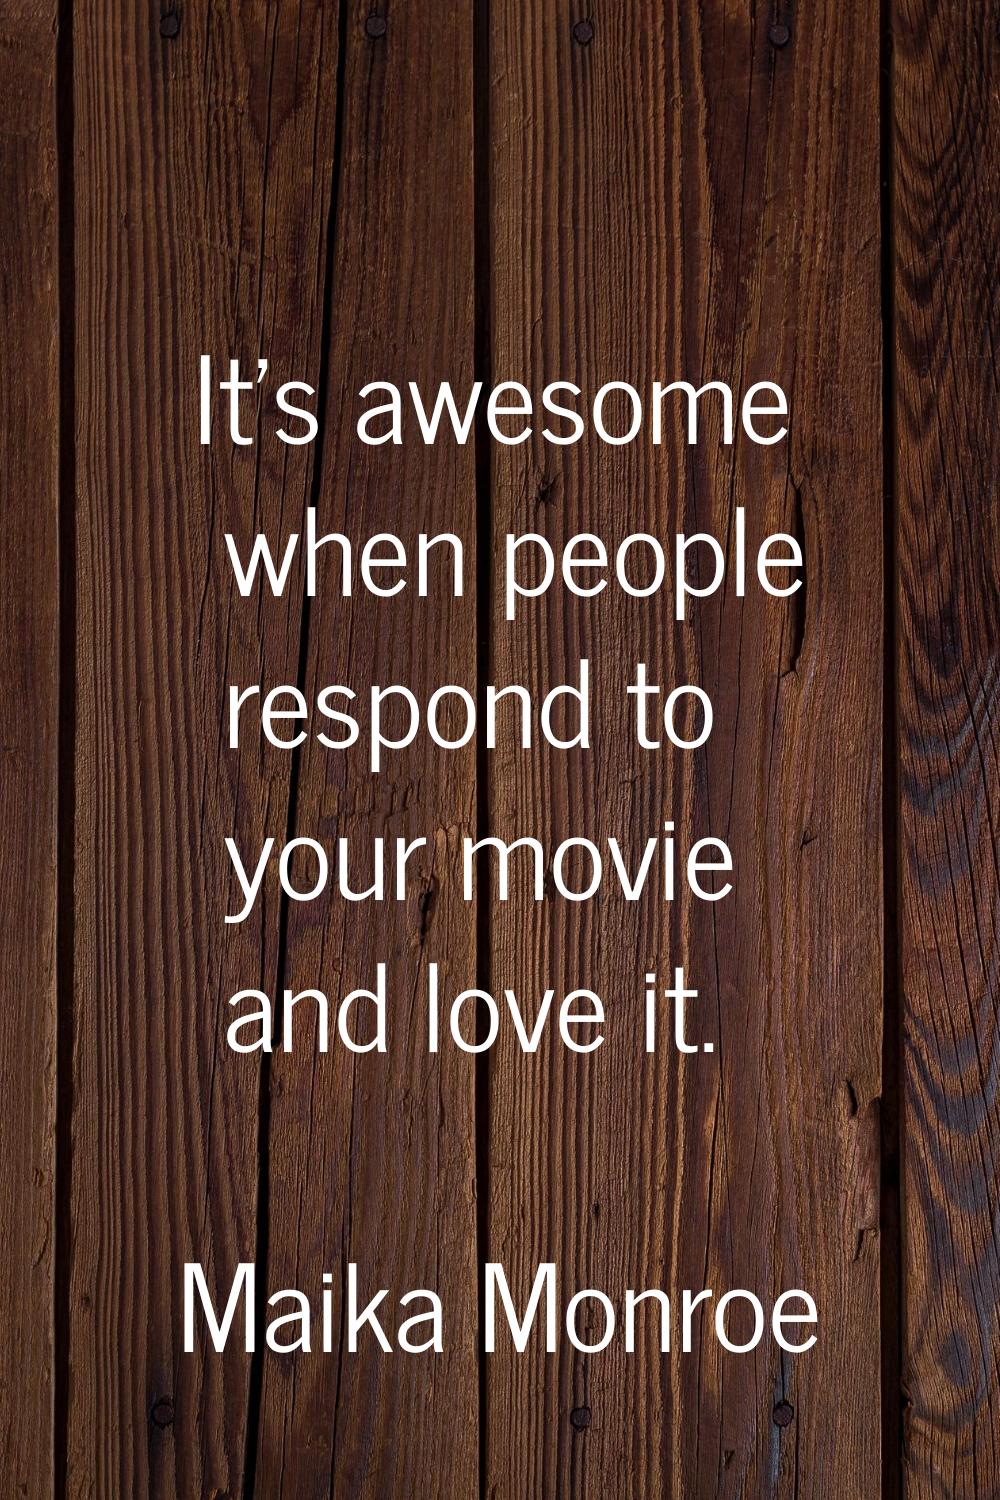 It's awesome when people respond to your movie and love it.